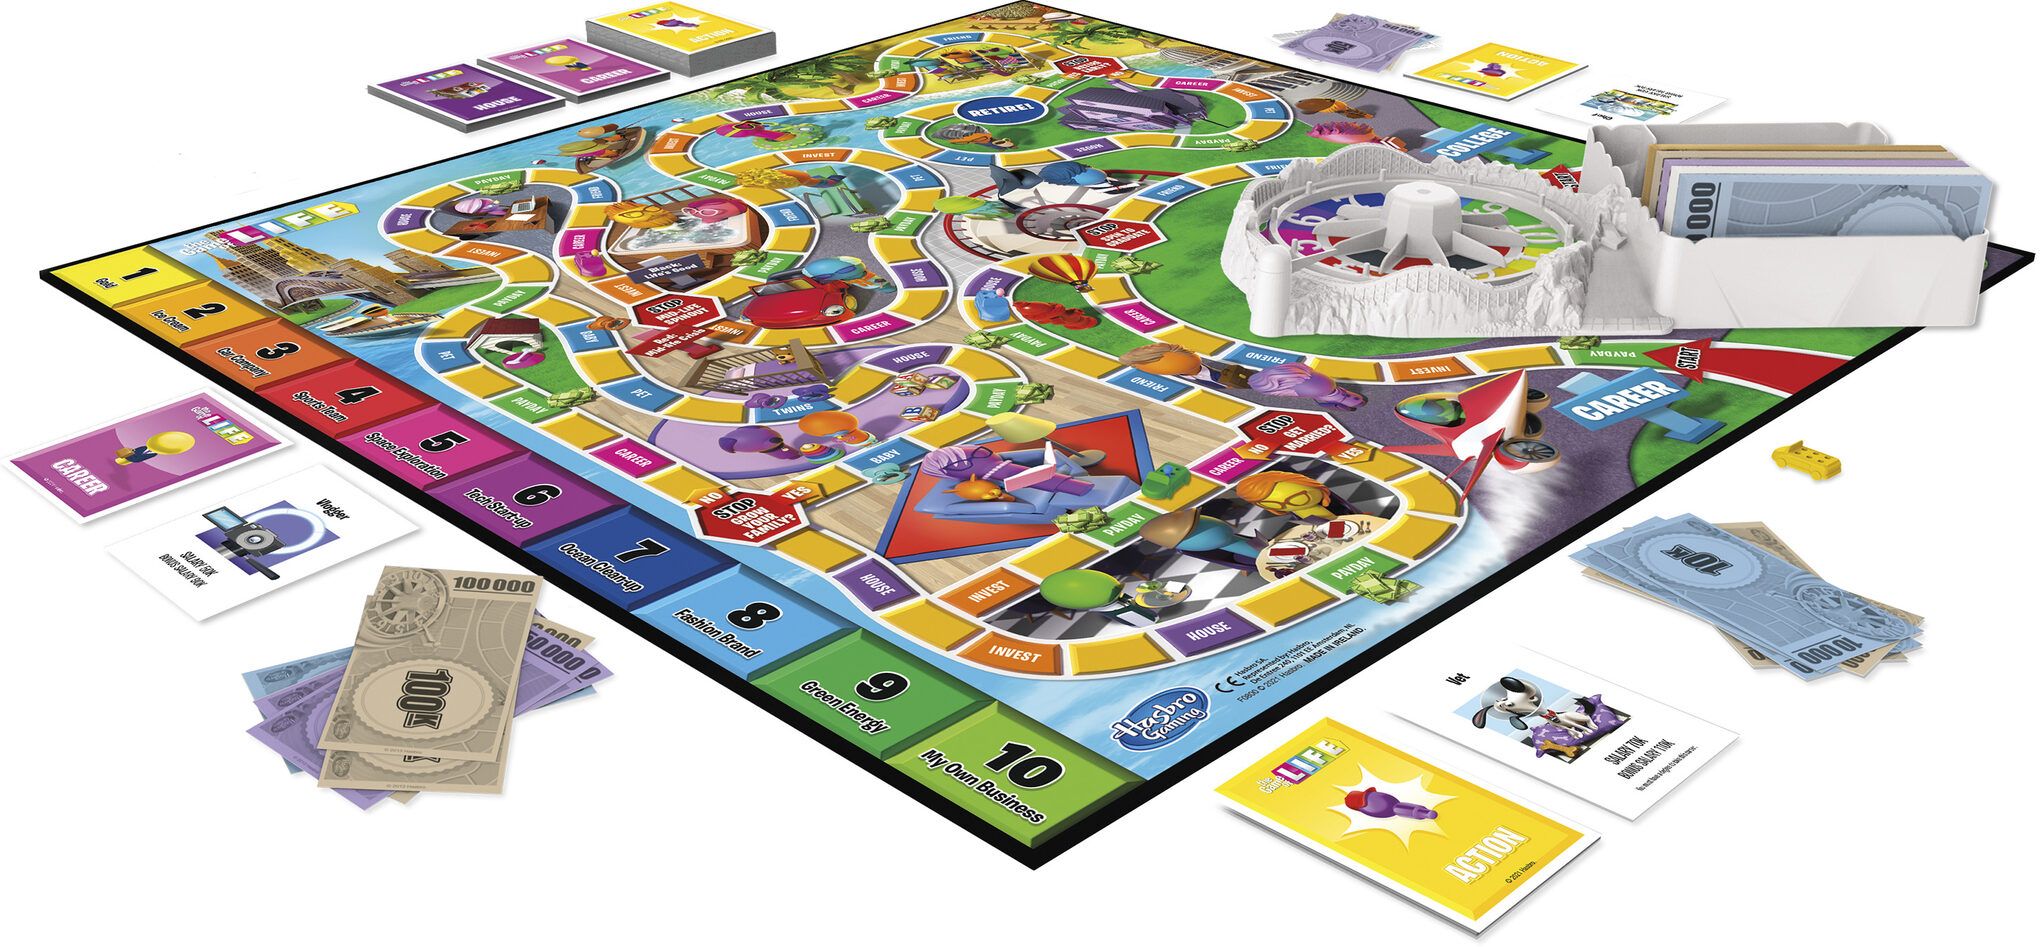 classic hasbro games - game of life board game - the toy room